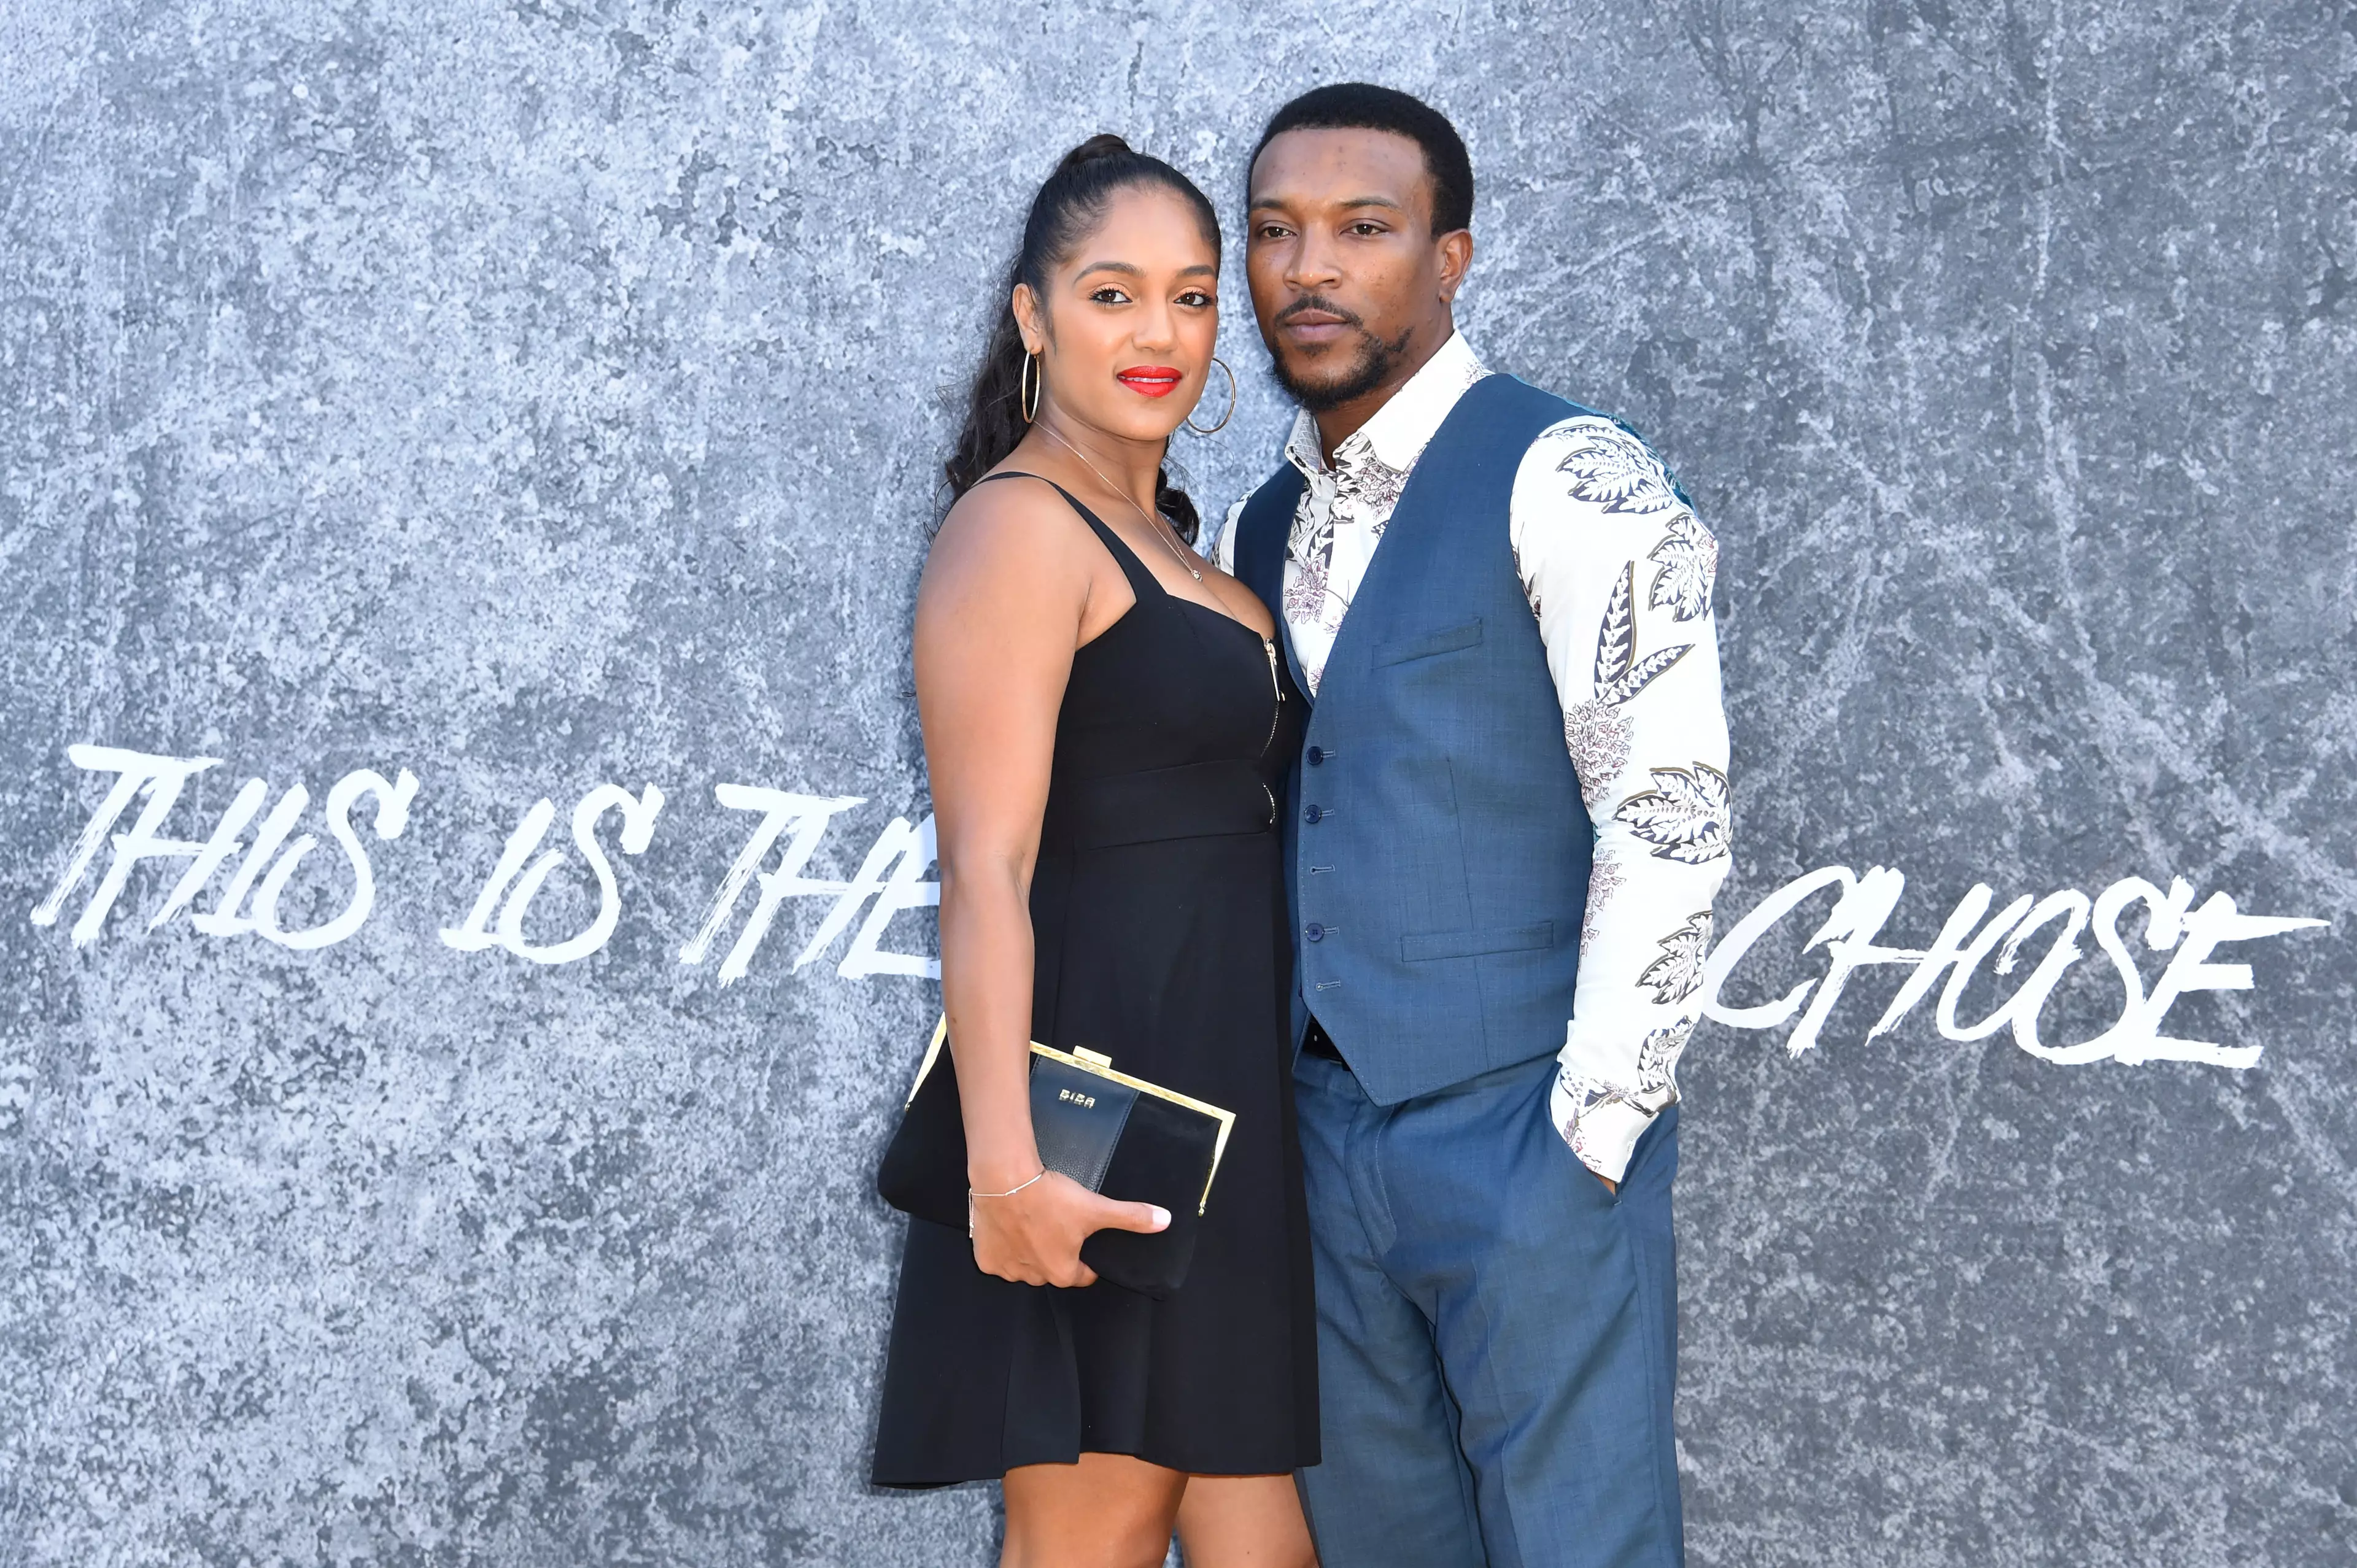 Ashley Walters With Hist Wife Danielle Isaie.